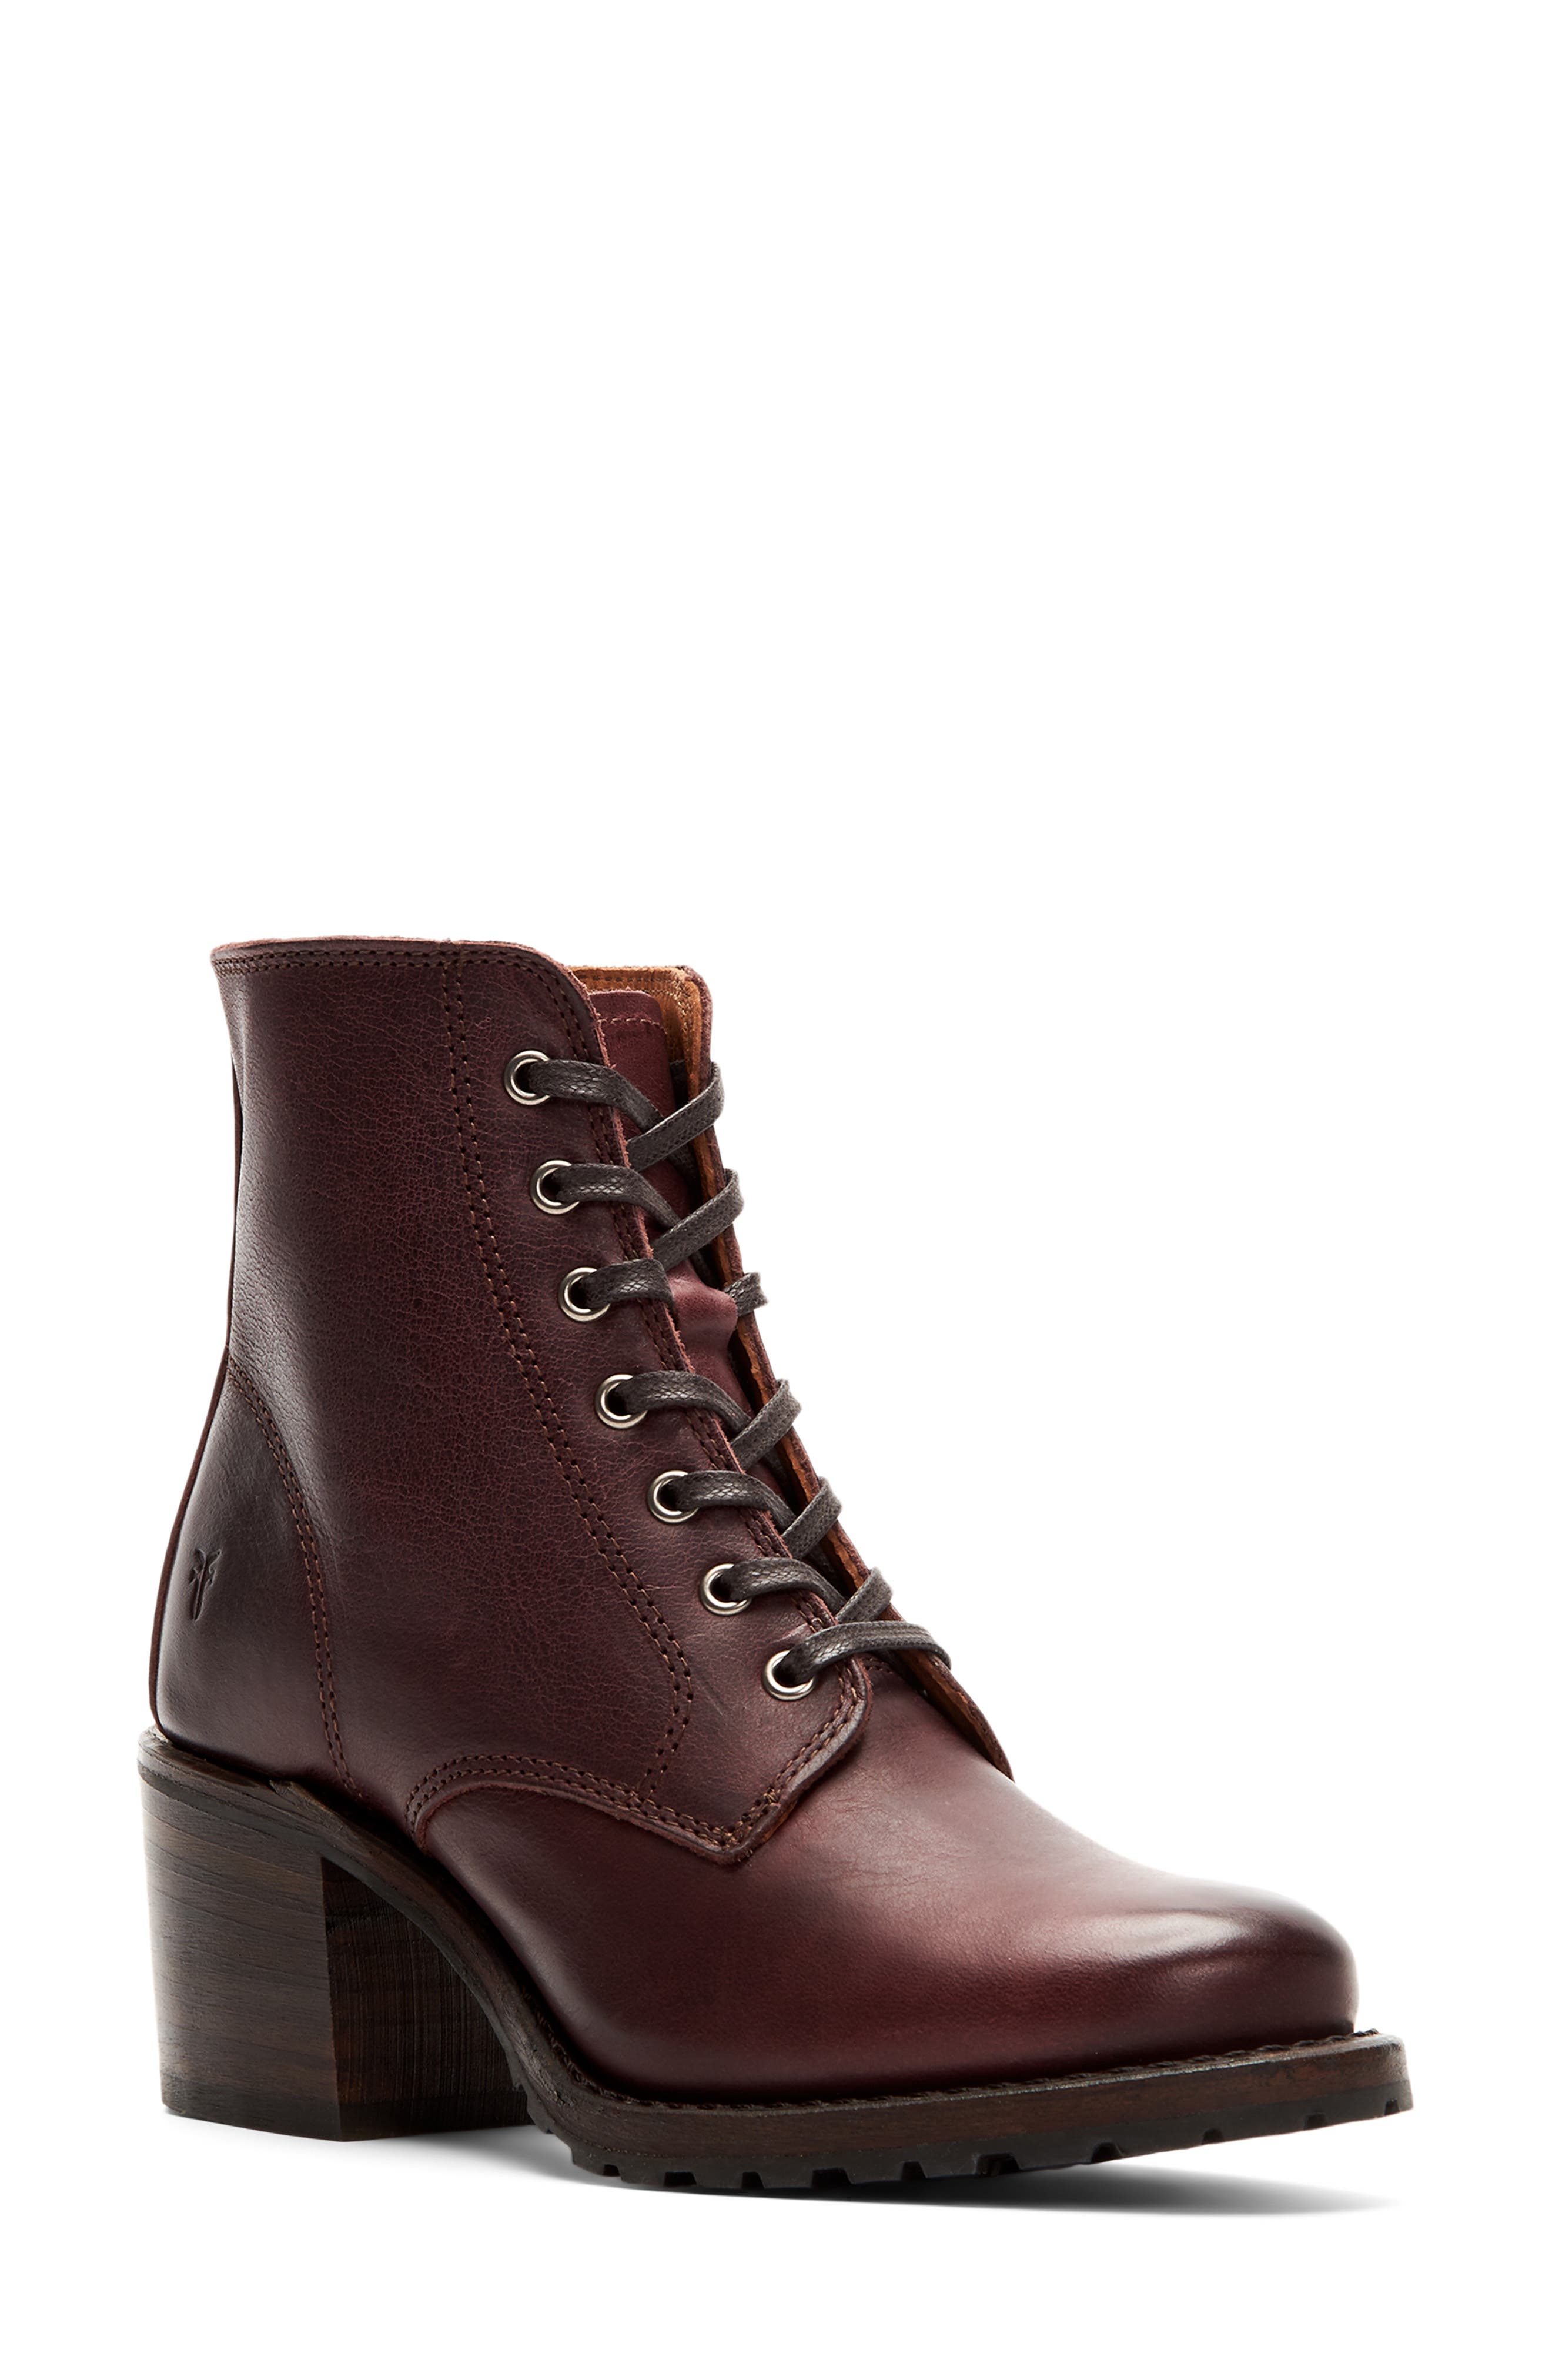 where can i buy frye boots near me